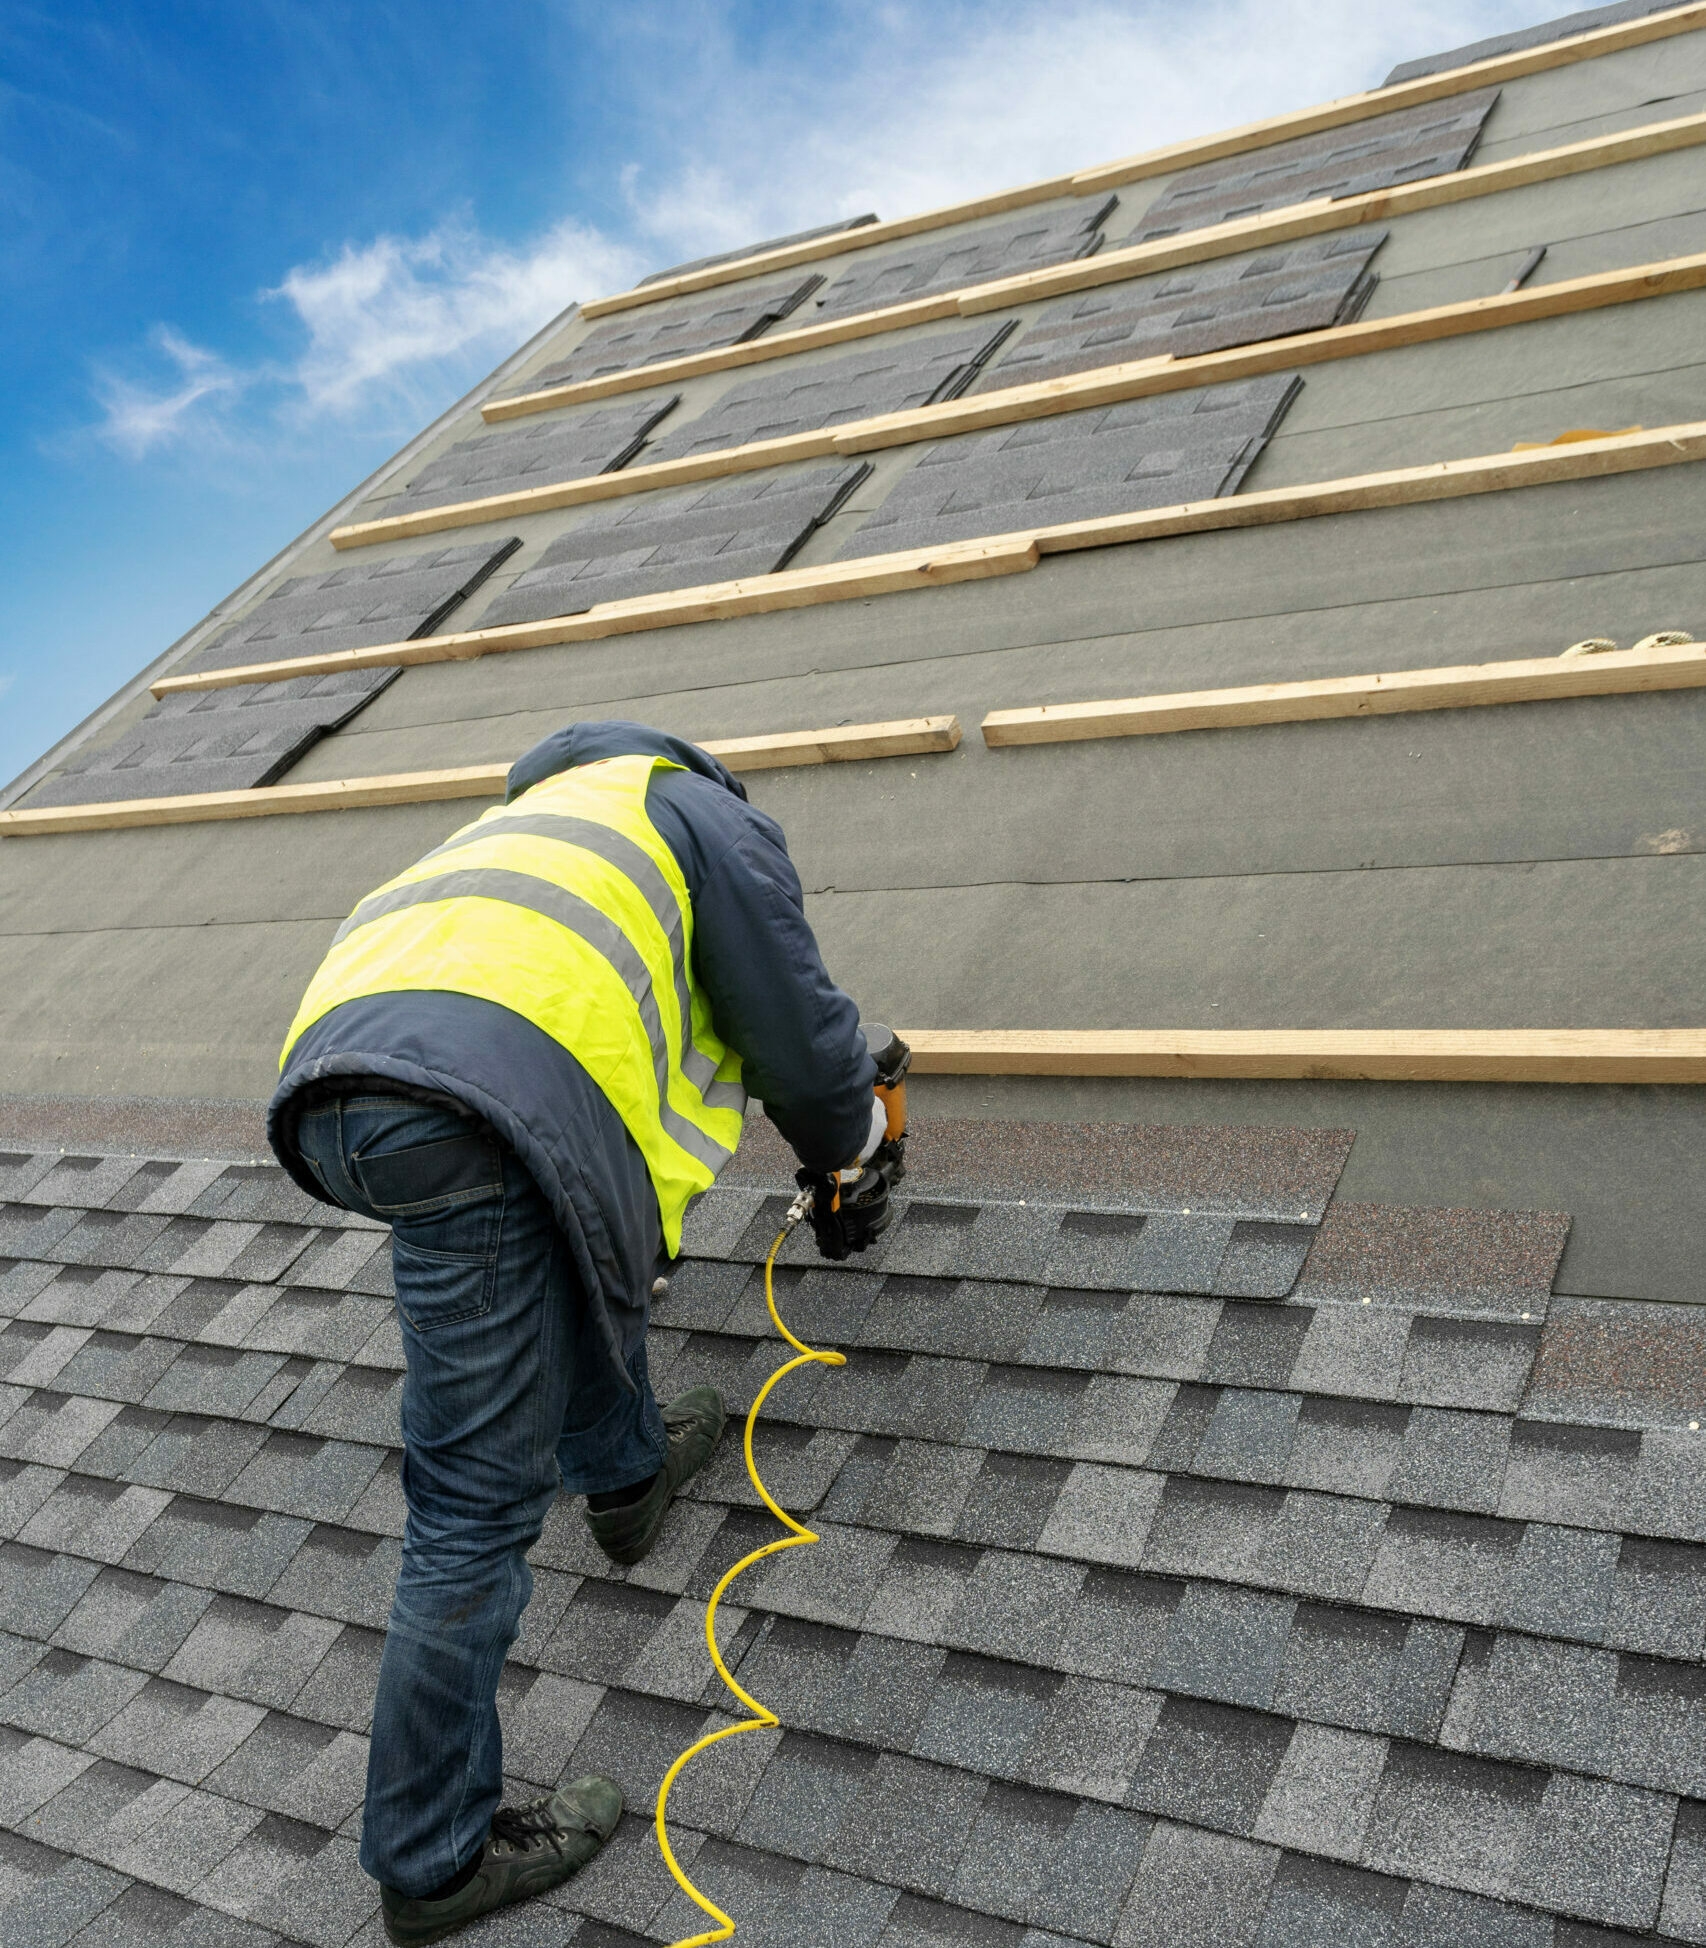 Discover expert tips on Residential Roofing Installation! Our guide provides valuable insights to ensure a sturdy and long-lasting roof.